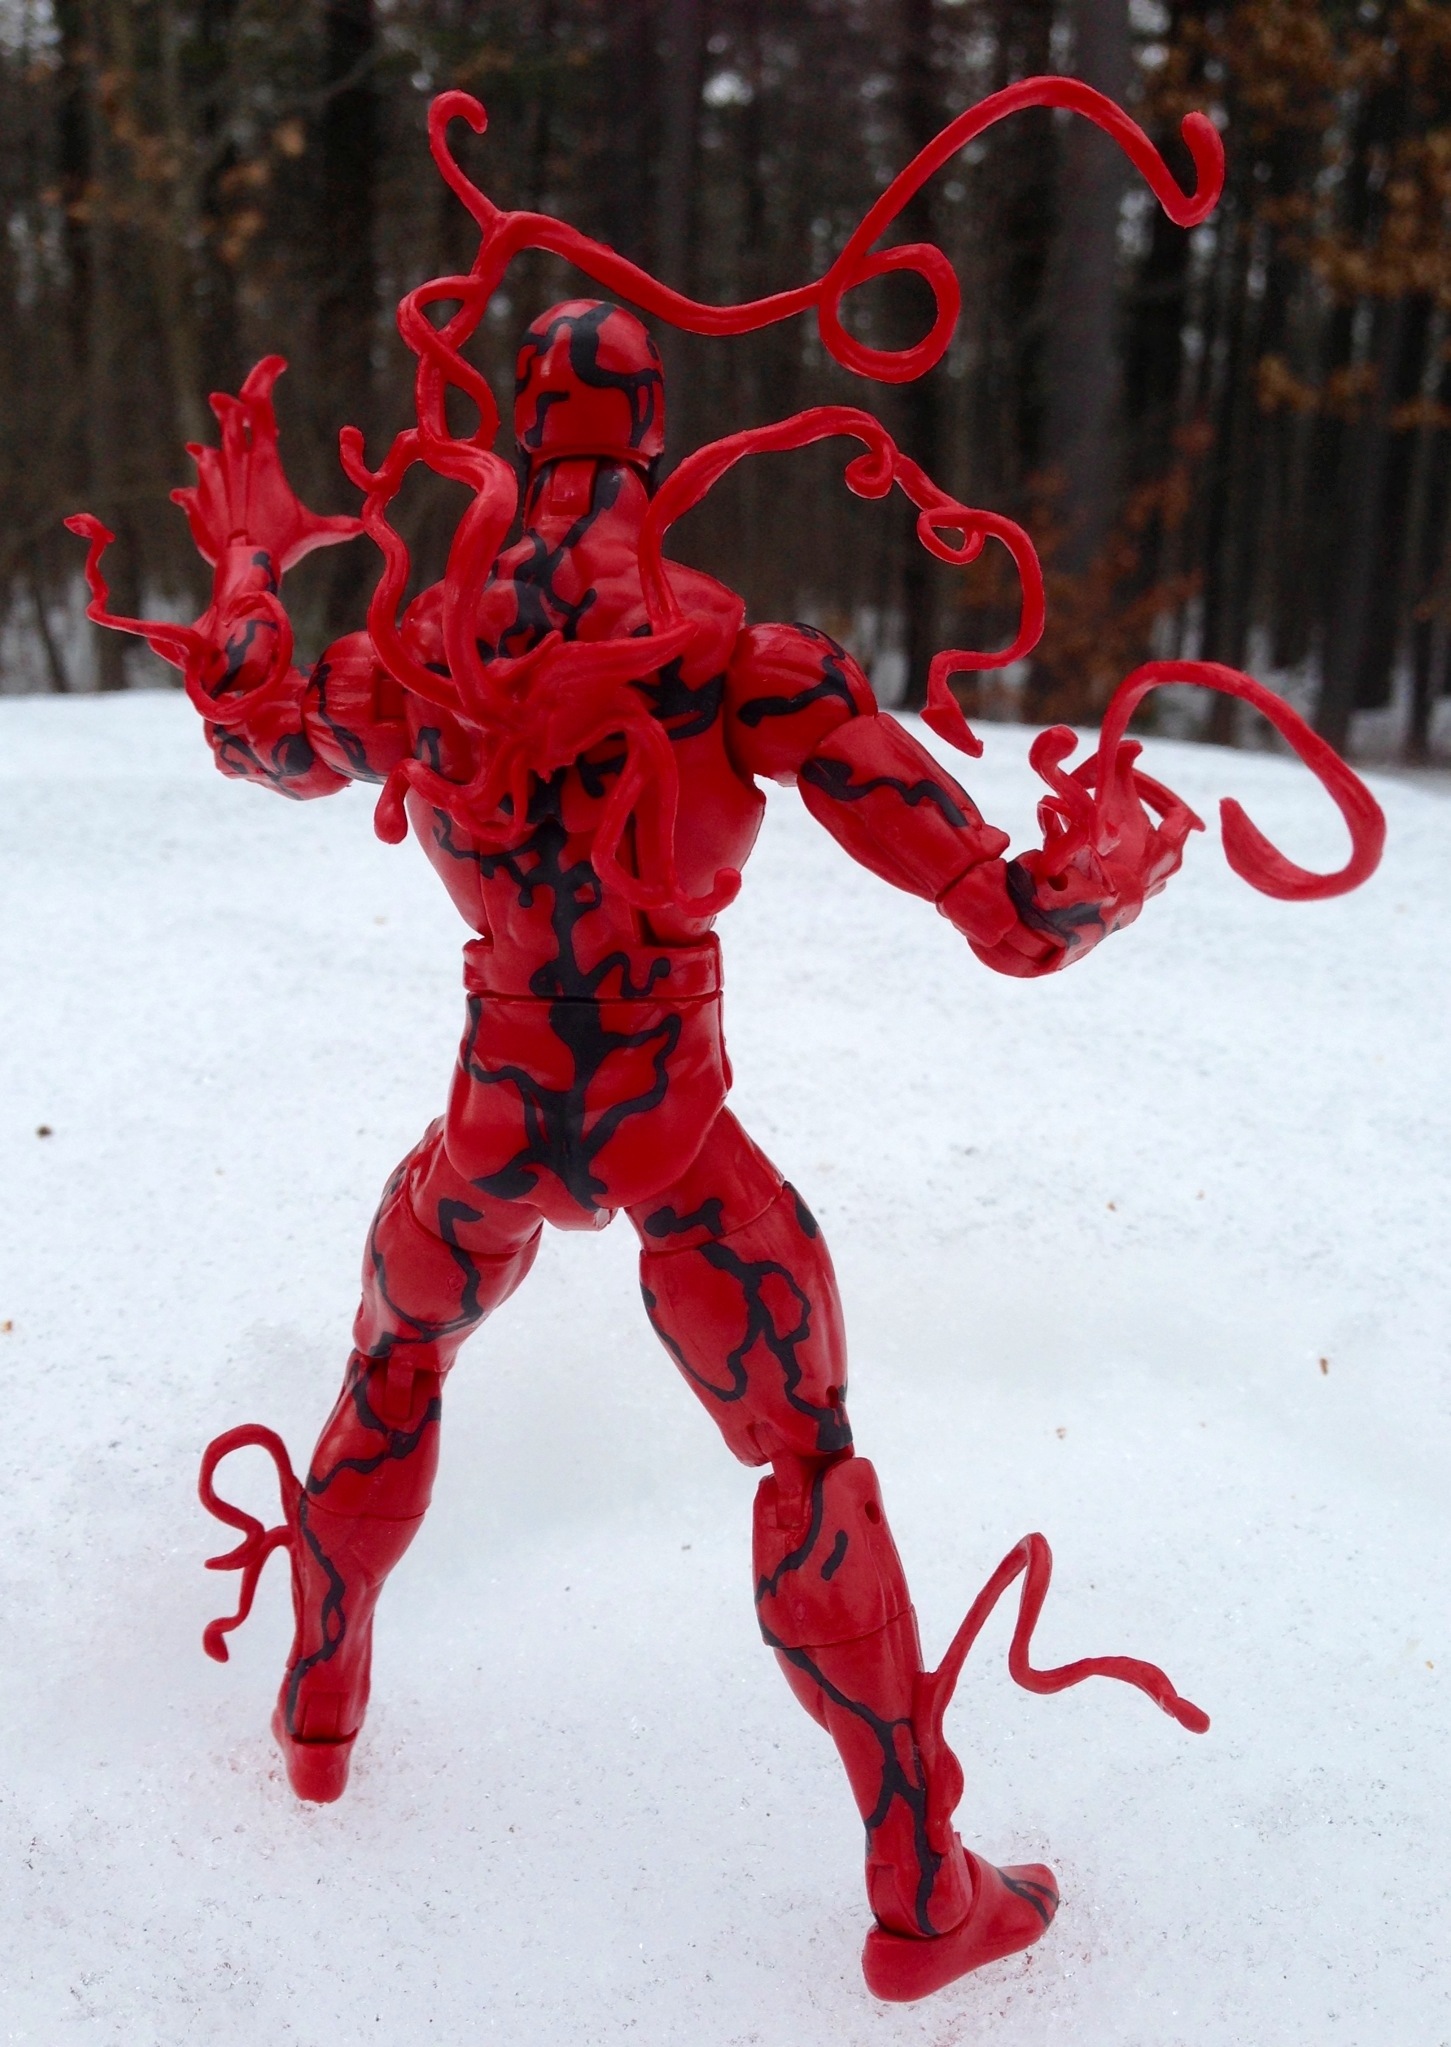 SpiderMan Marvel Legends Carnage Review & Photos (2014